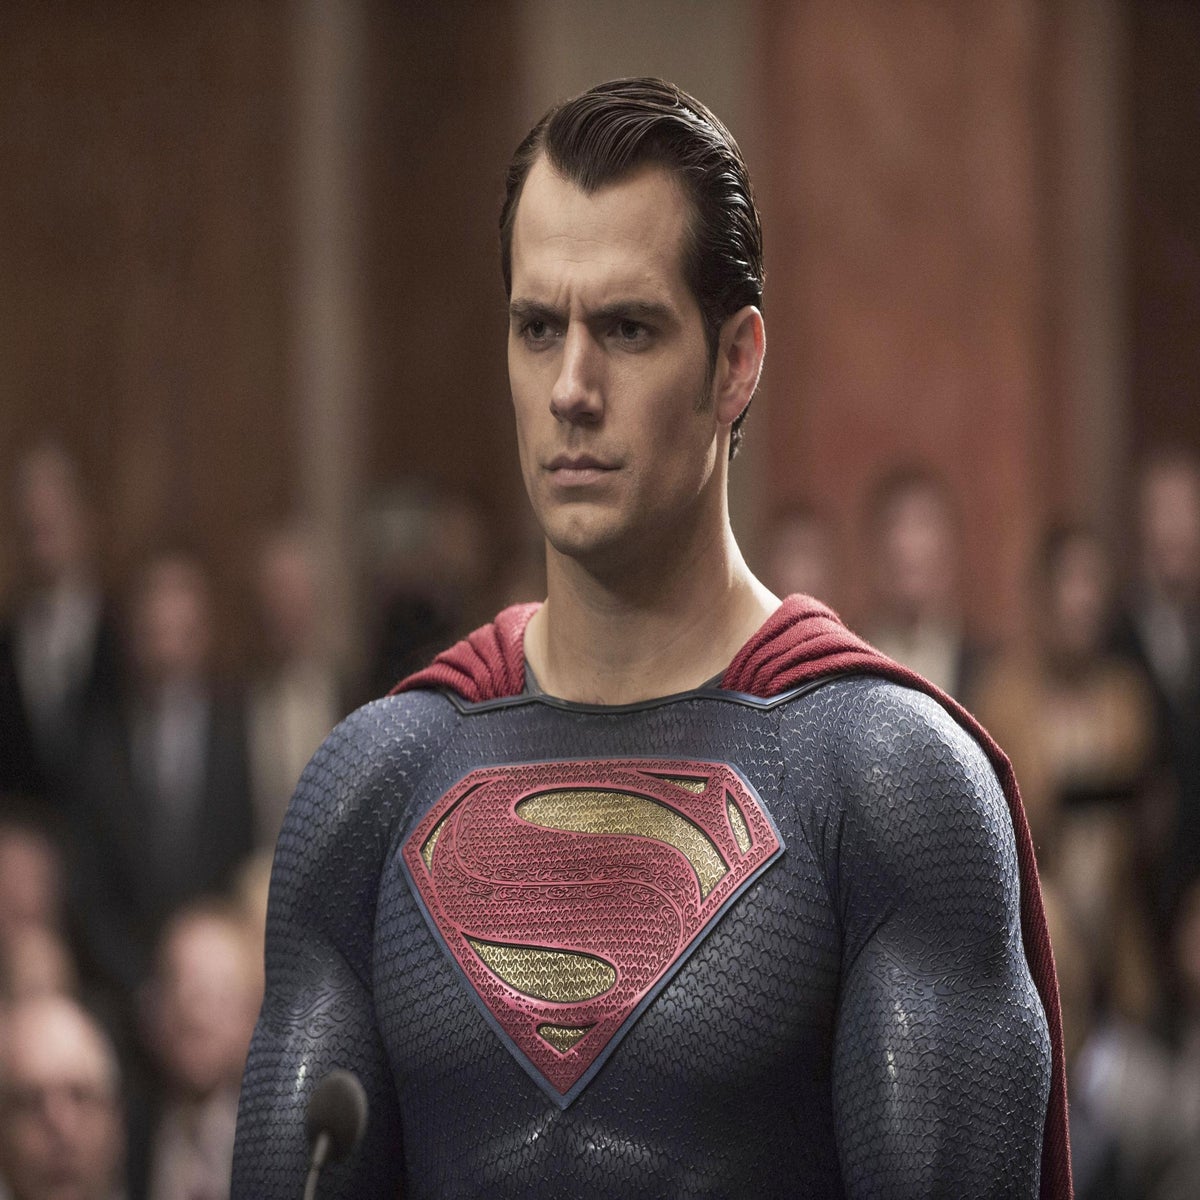 Henry Cavill's Man of Steel 2 Reportedly Coming Sooner Than Expected